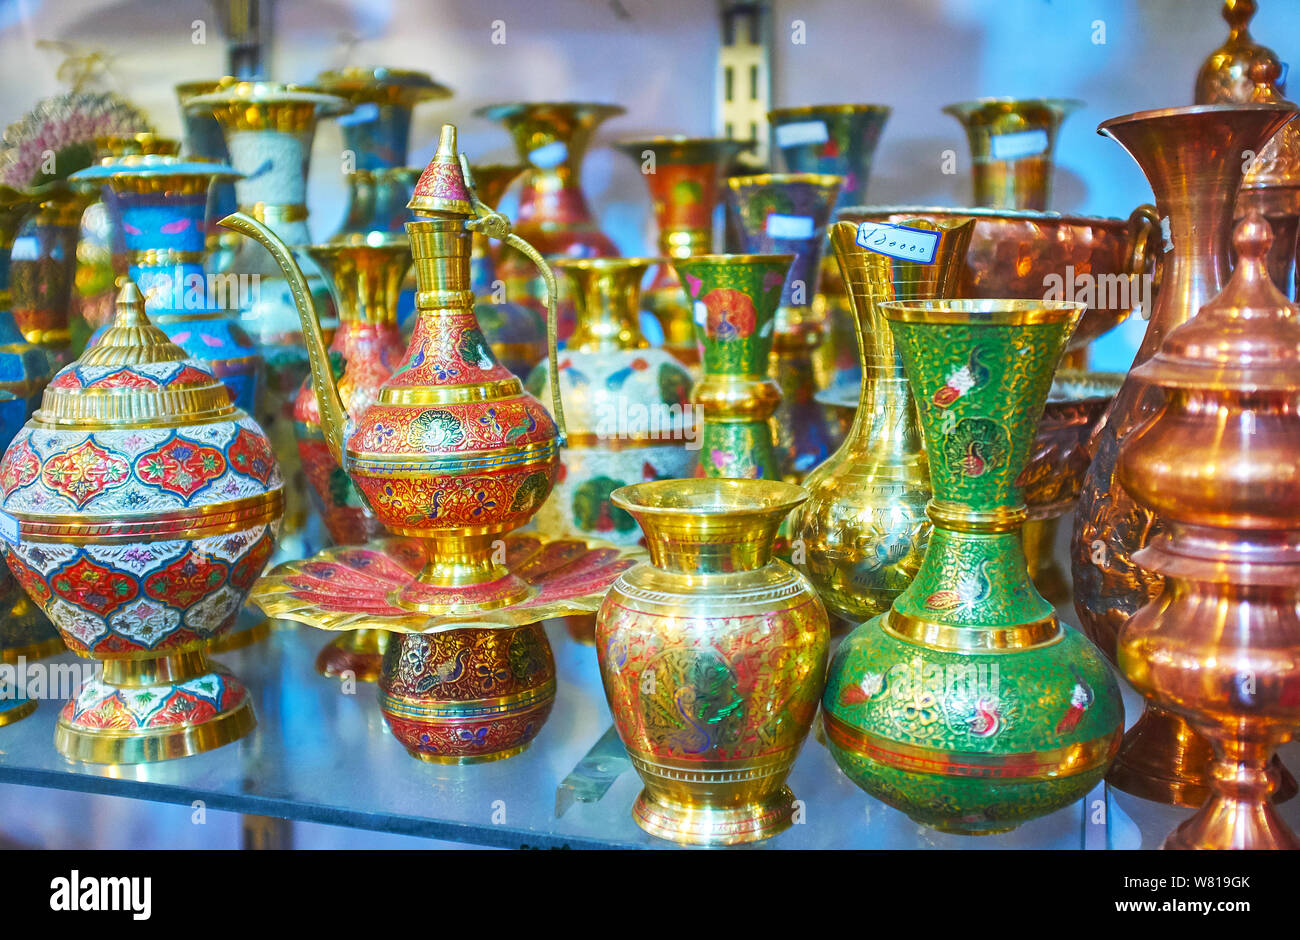 The ornate tableware of Meenakari decorative technique; jugs and coffee pots are covered with engravings and colored enamels, Shiraz, Iran Stock Photo